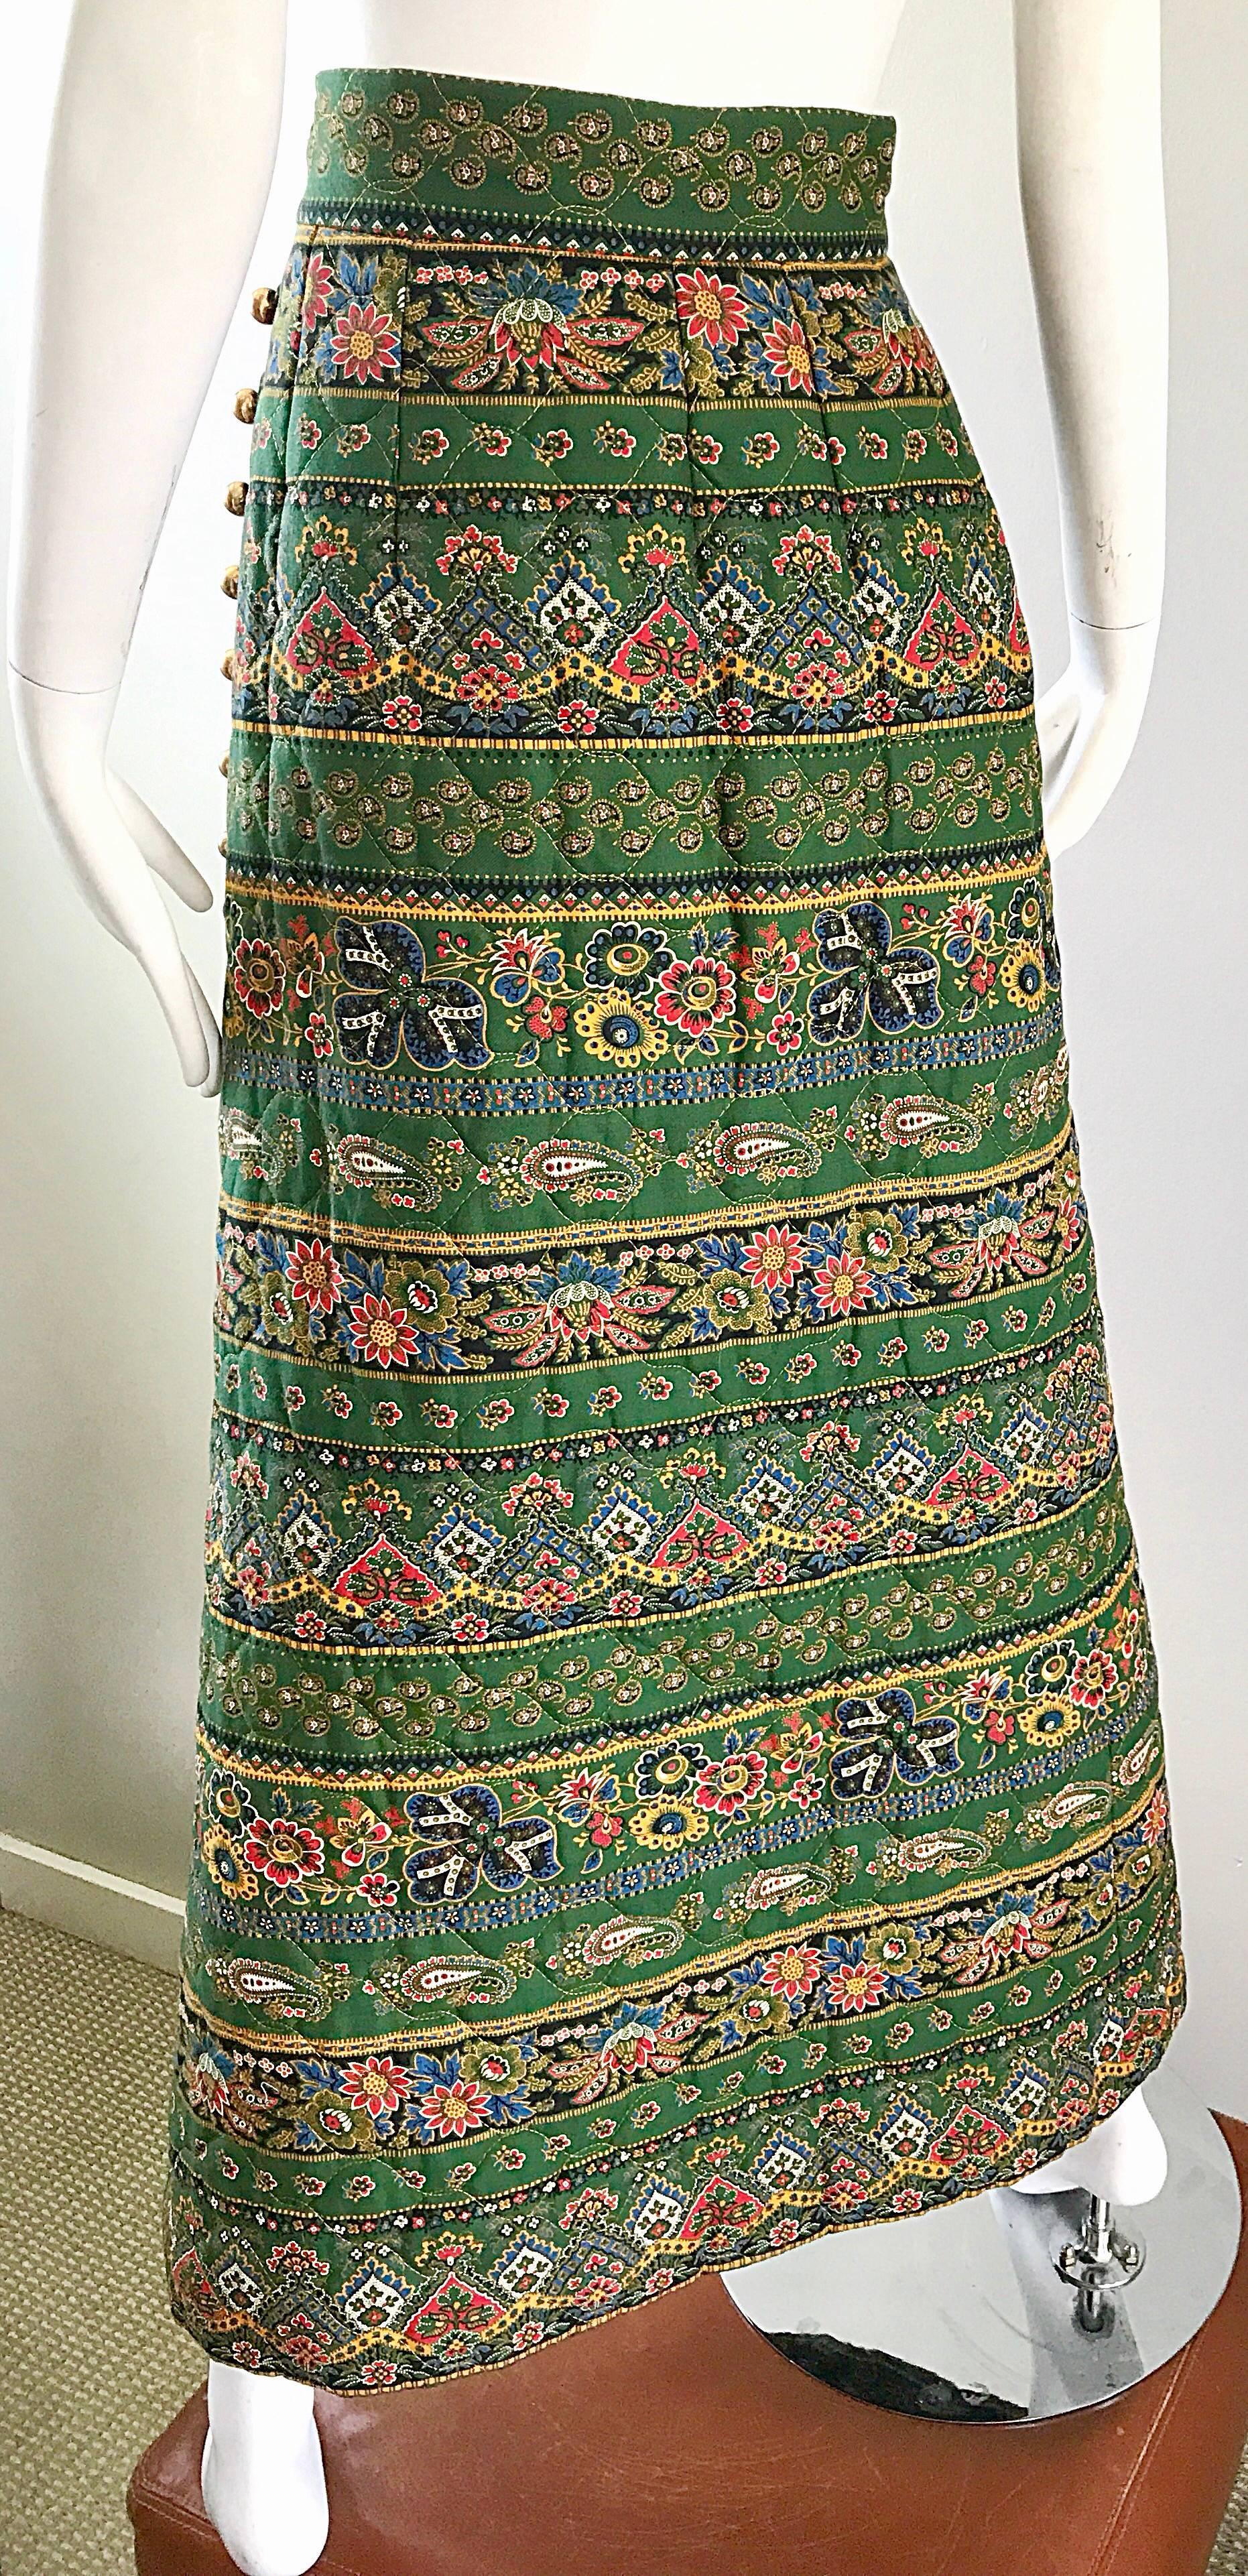 1970s Bonwit Teller Paisley Flower Print Vintage 70s Cotton Boho Maxi Skirt  In Excellent Condition For Sale In San Diego, CA